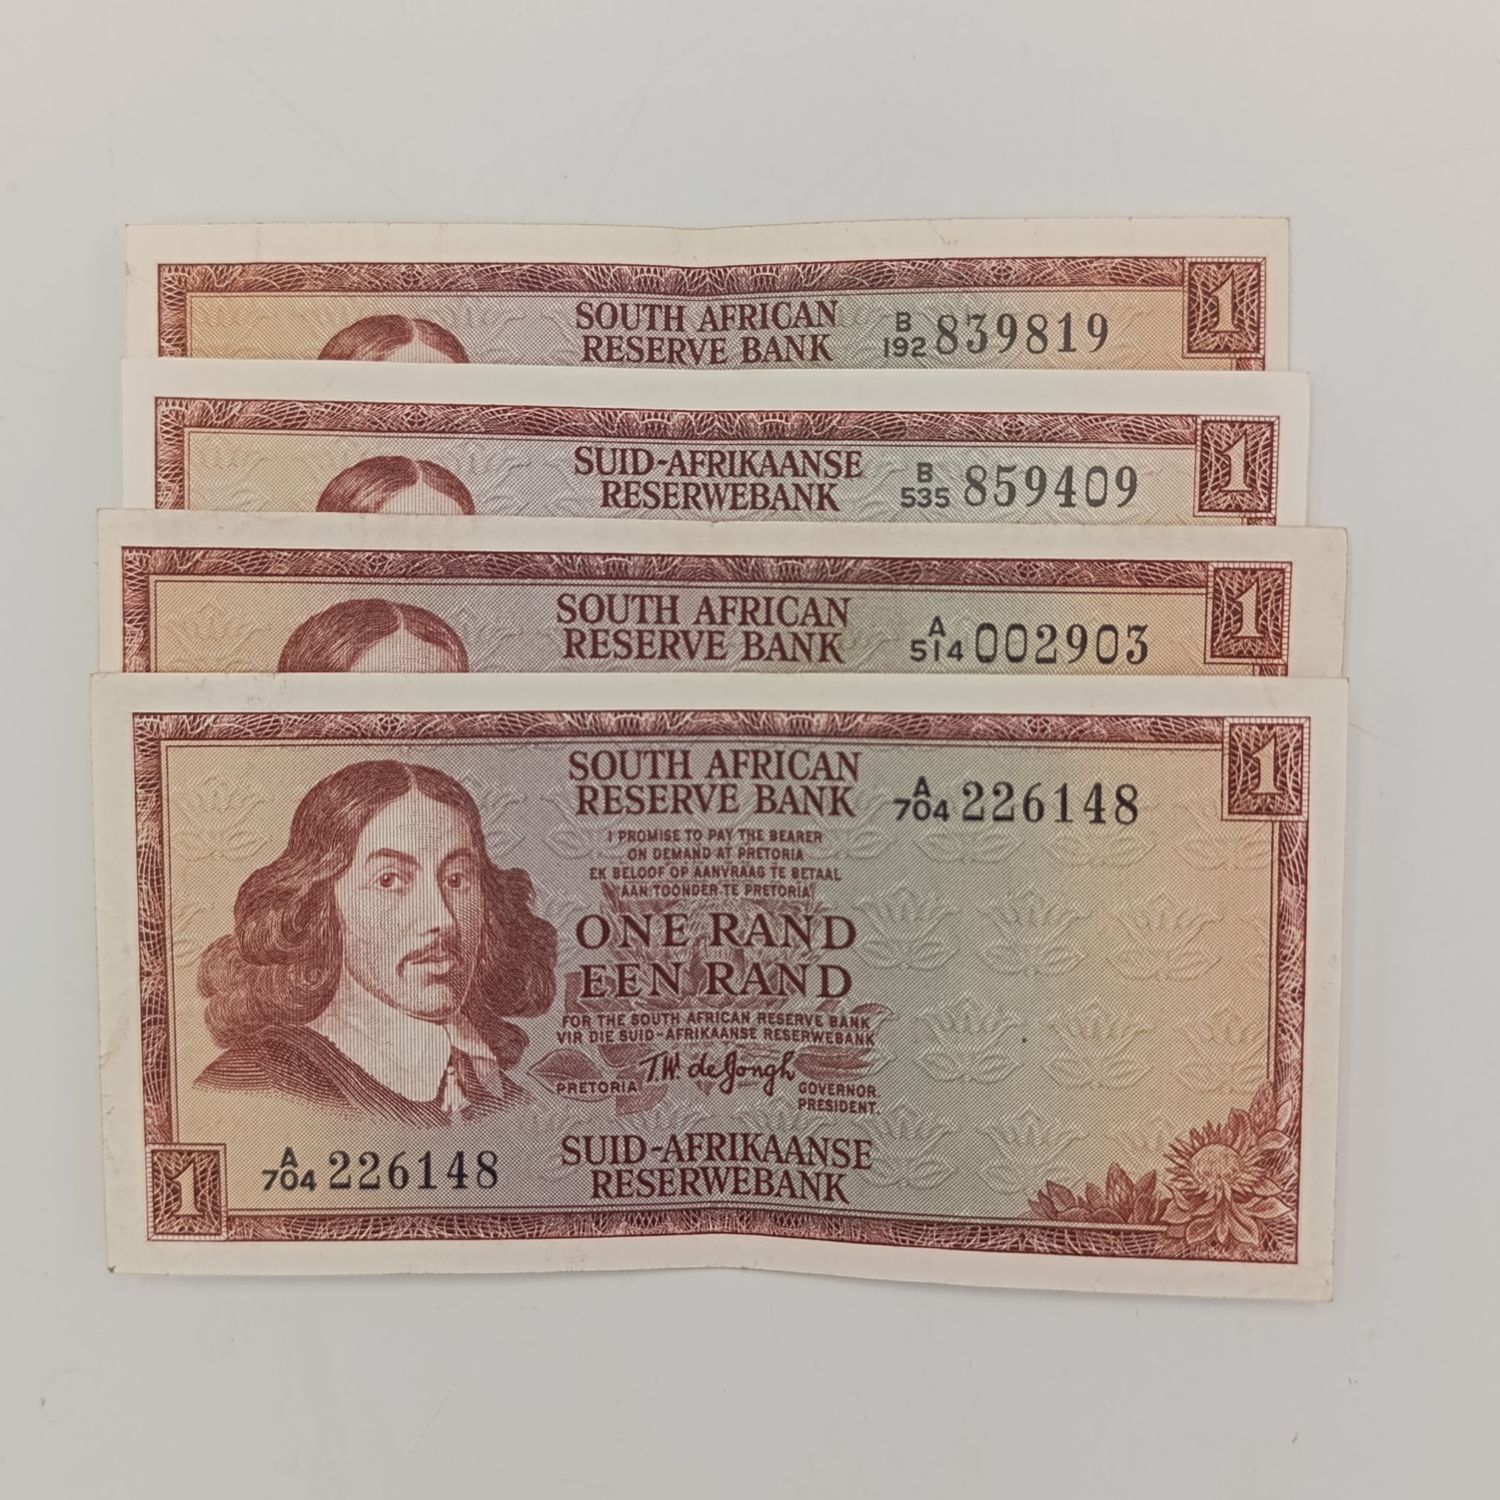 Full set of TW de Jongh R1 banknotes - all years Issued 1967, 1972, 1973 &amp; 1975